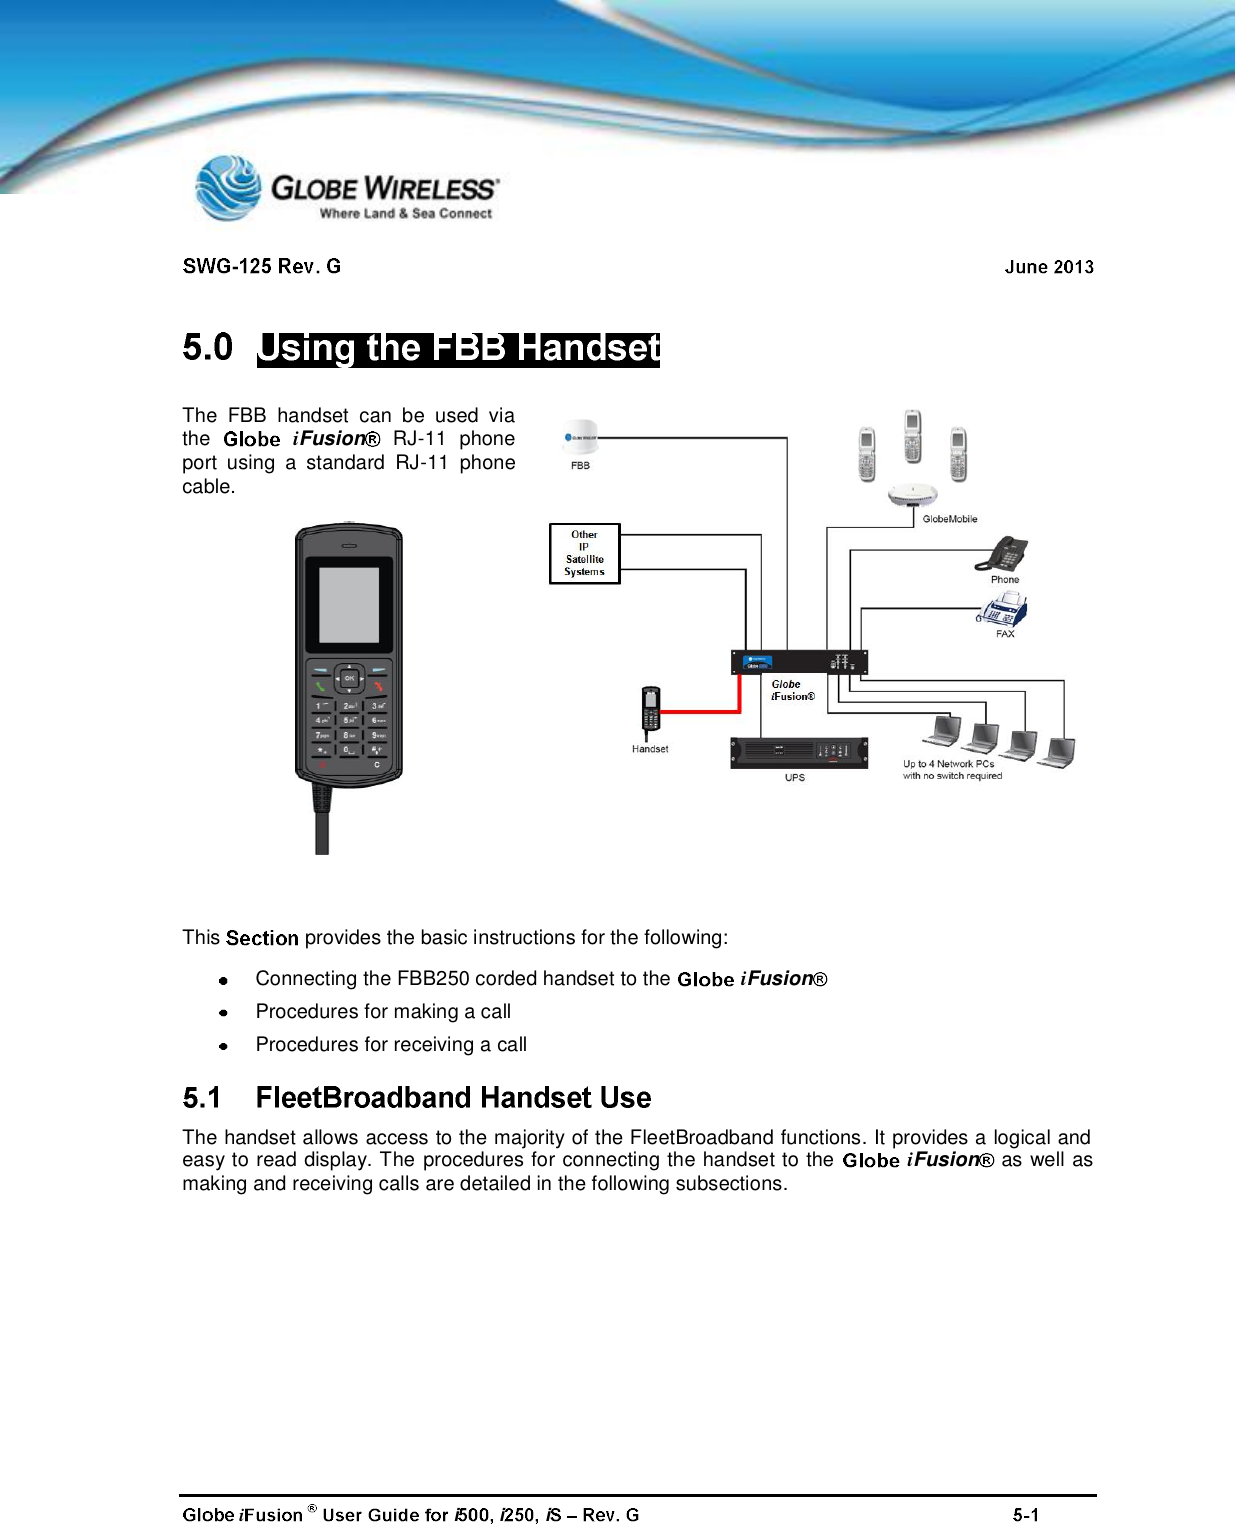 ii i iThe FBB handset can be used viathe iFusion RJ-11phoneport using a standard RJ-11 phonecable.This provides the basic instructions for the following:Connecting the FBB250 corded handset to the iFusionProcedures for making a callProcedures for receiving a callThe handset allows access to the majority of the FleetBroadband functions. It provides a logical andeasy to read display. The procedures for connecting the handset to the iFusion as well asmaking and receiving calls are detailed in the following subsections.